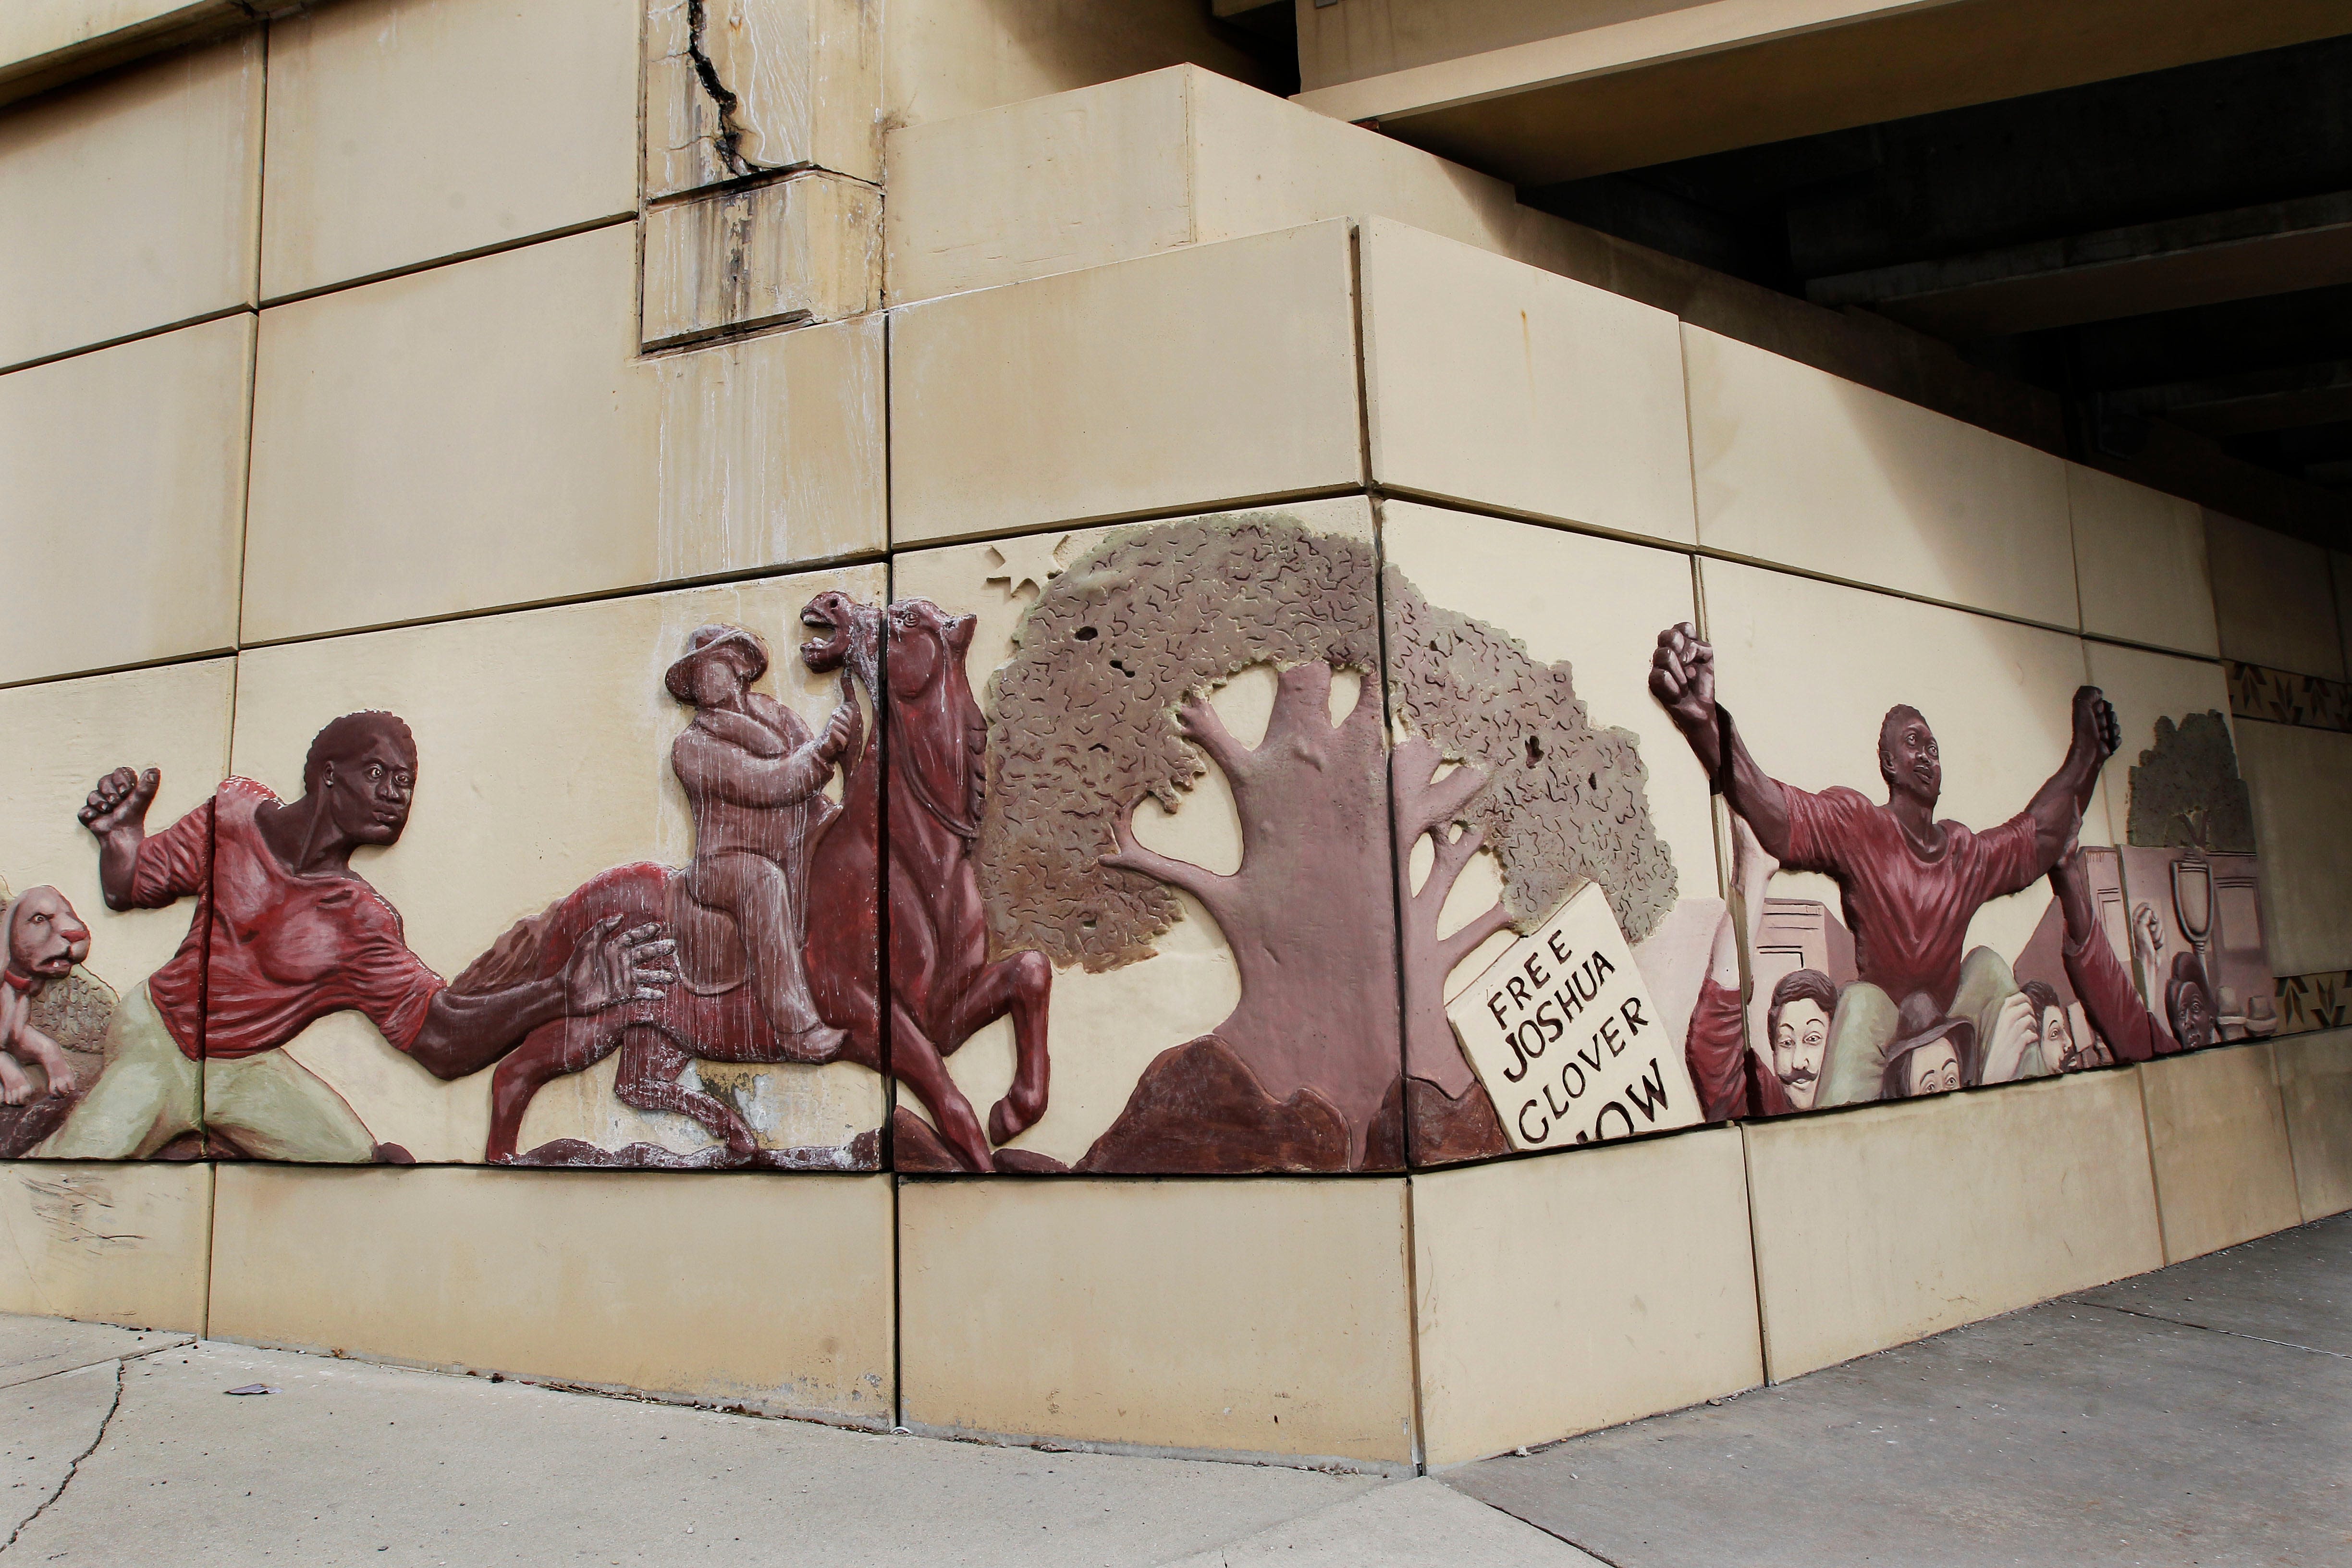 The Joshua Glover plaque and mural mark a key part of Milwaukee's history